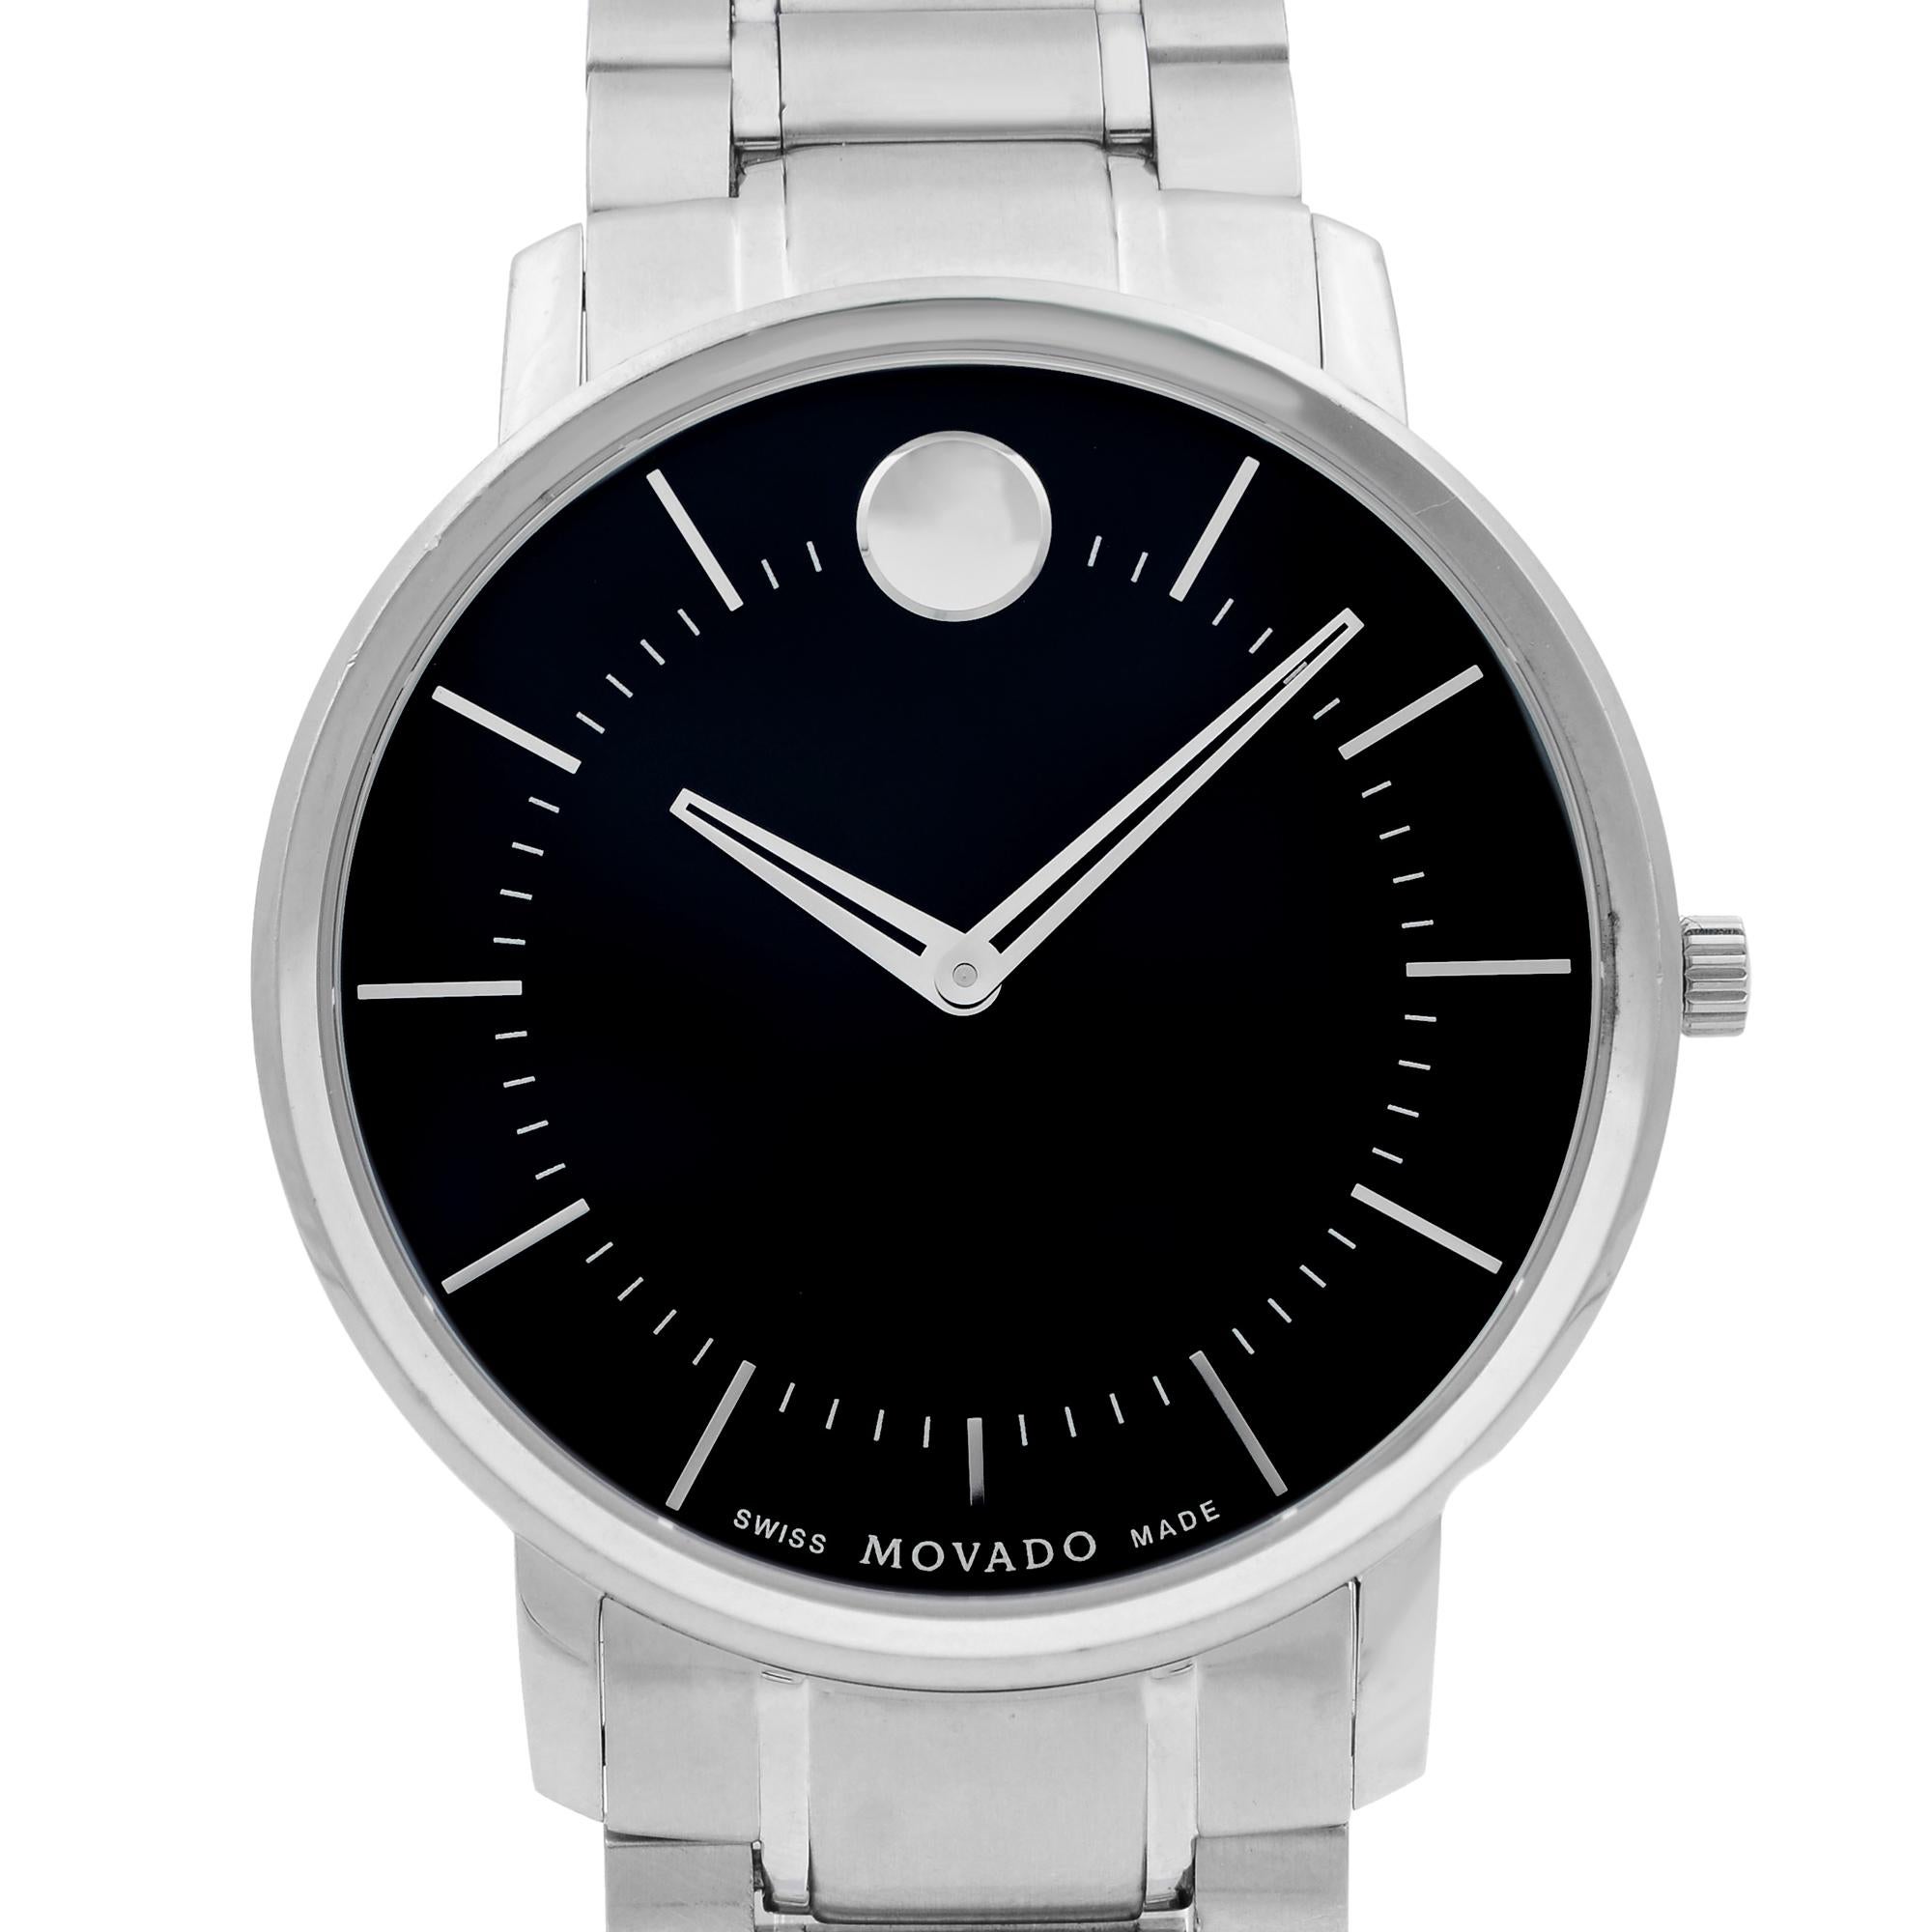 This pre-owned Movado   is a beautiful  timepiece that is powered by quartz (battery) movement which is cased in a stainless steel case. It has a round shape face, no features dial and has hand  style markers. It is completed with a  band that opens